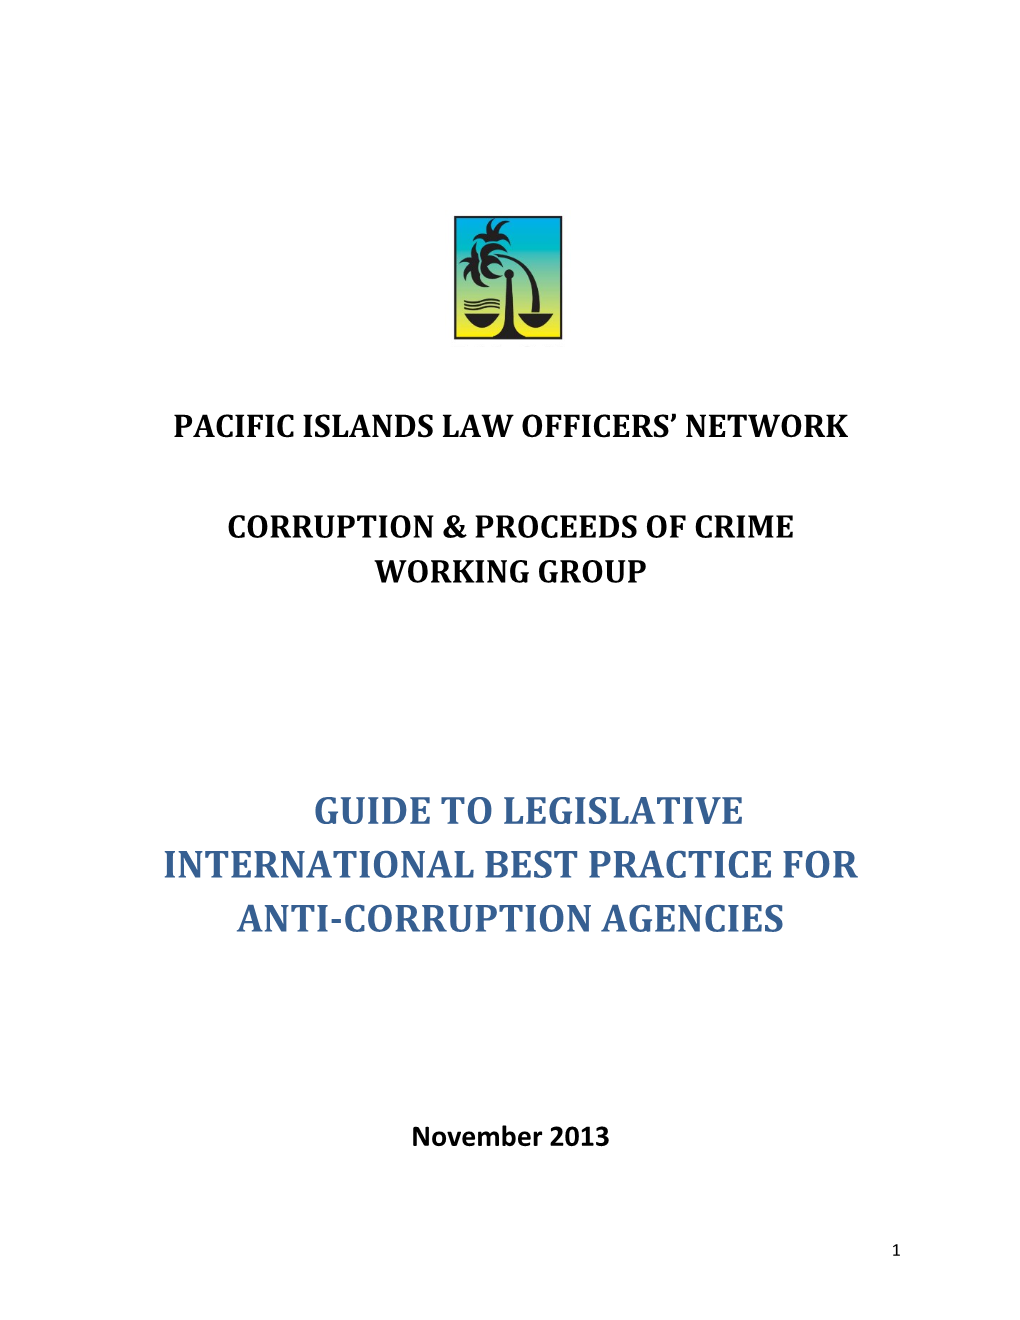 Pacific Islands Law Officers Network